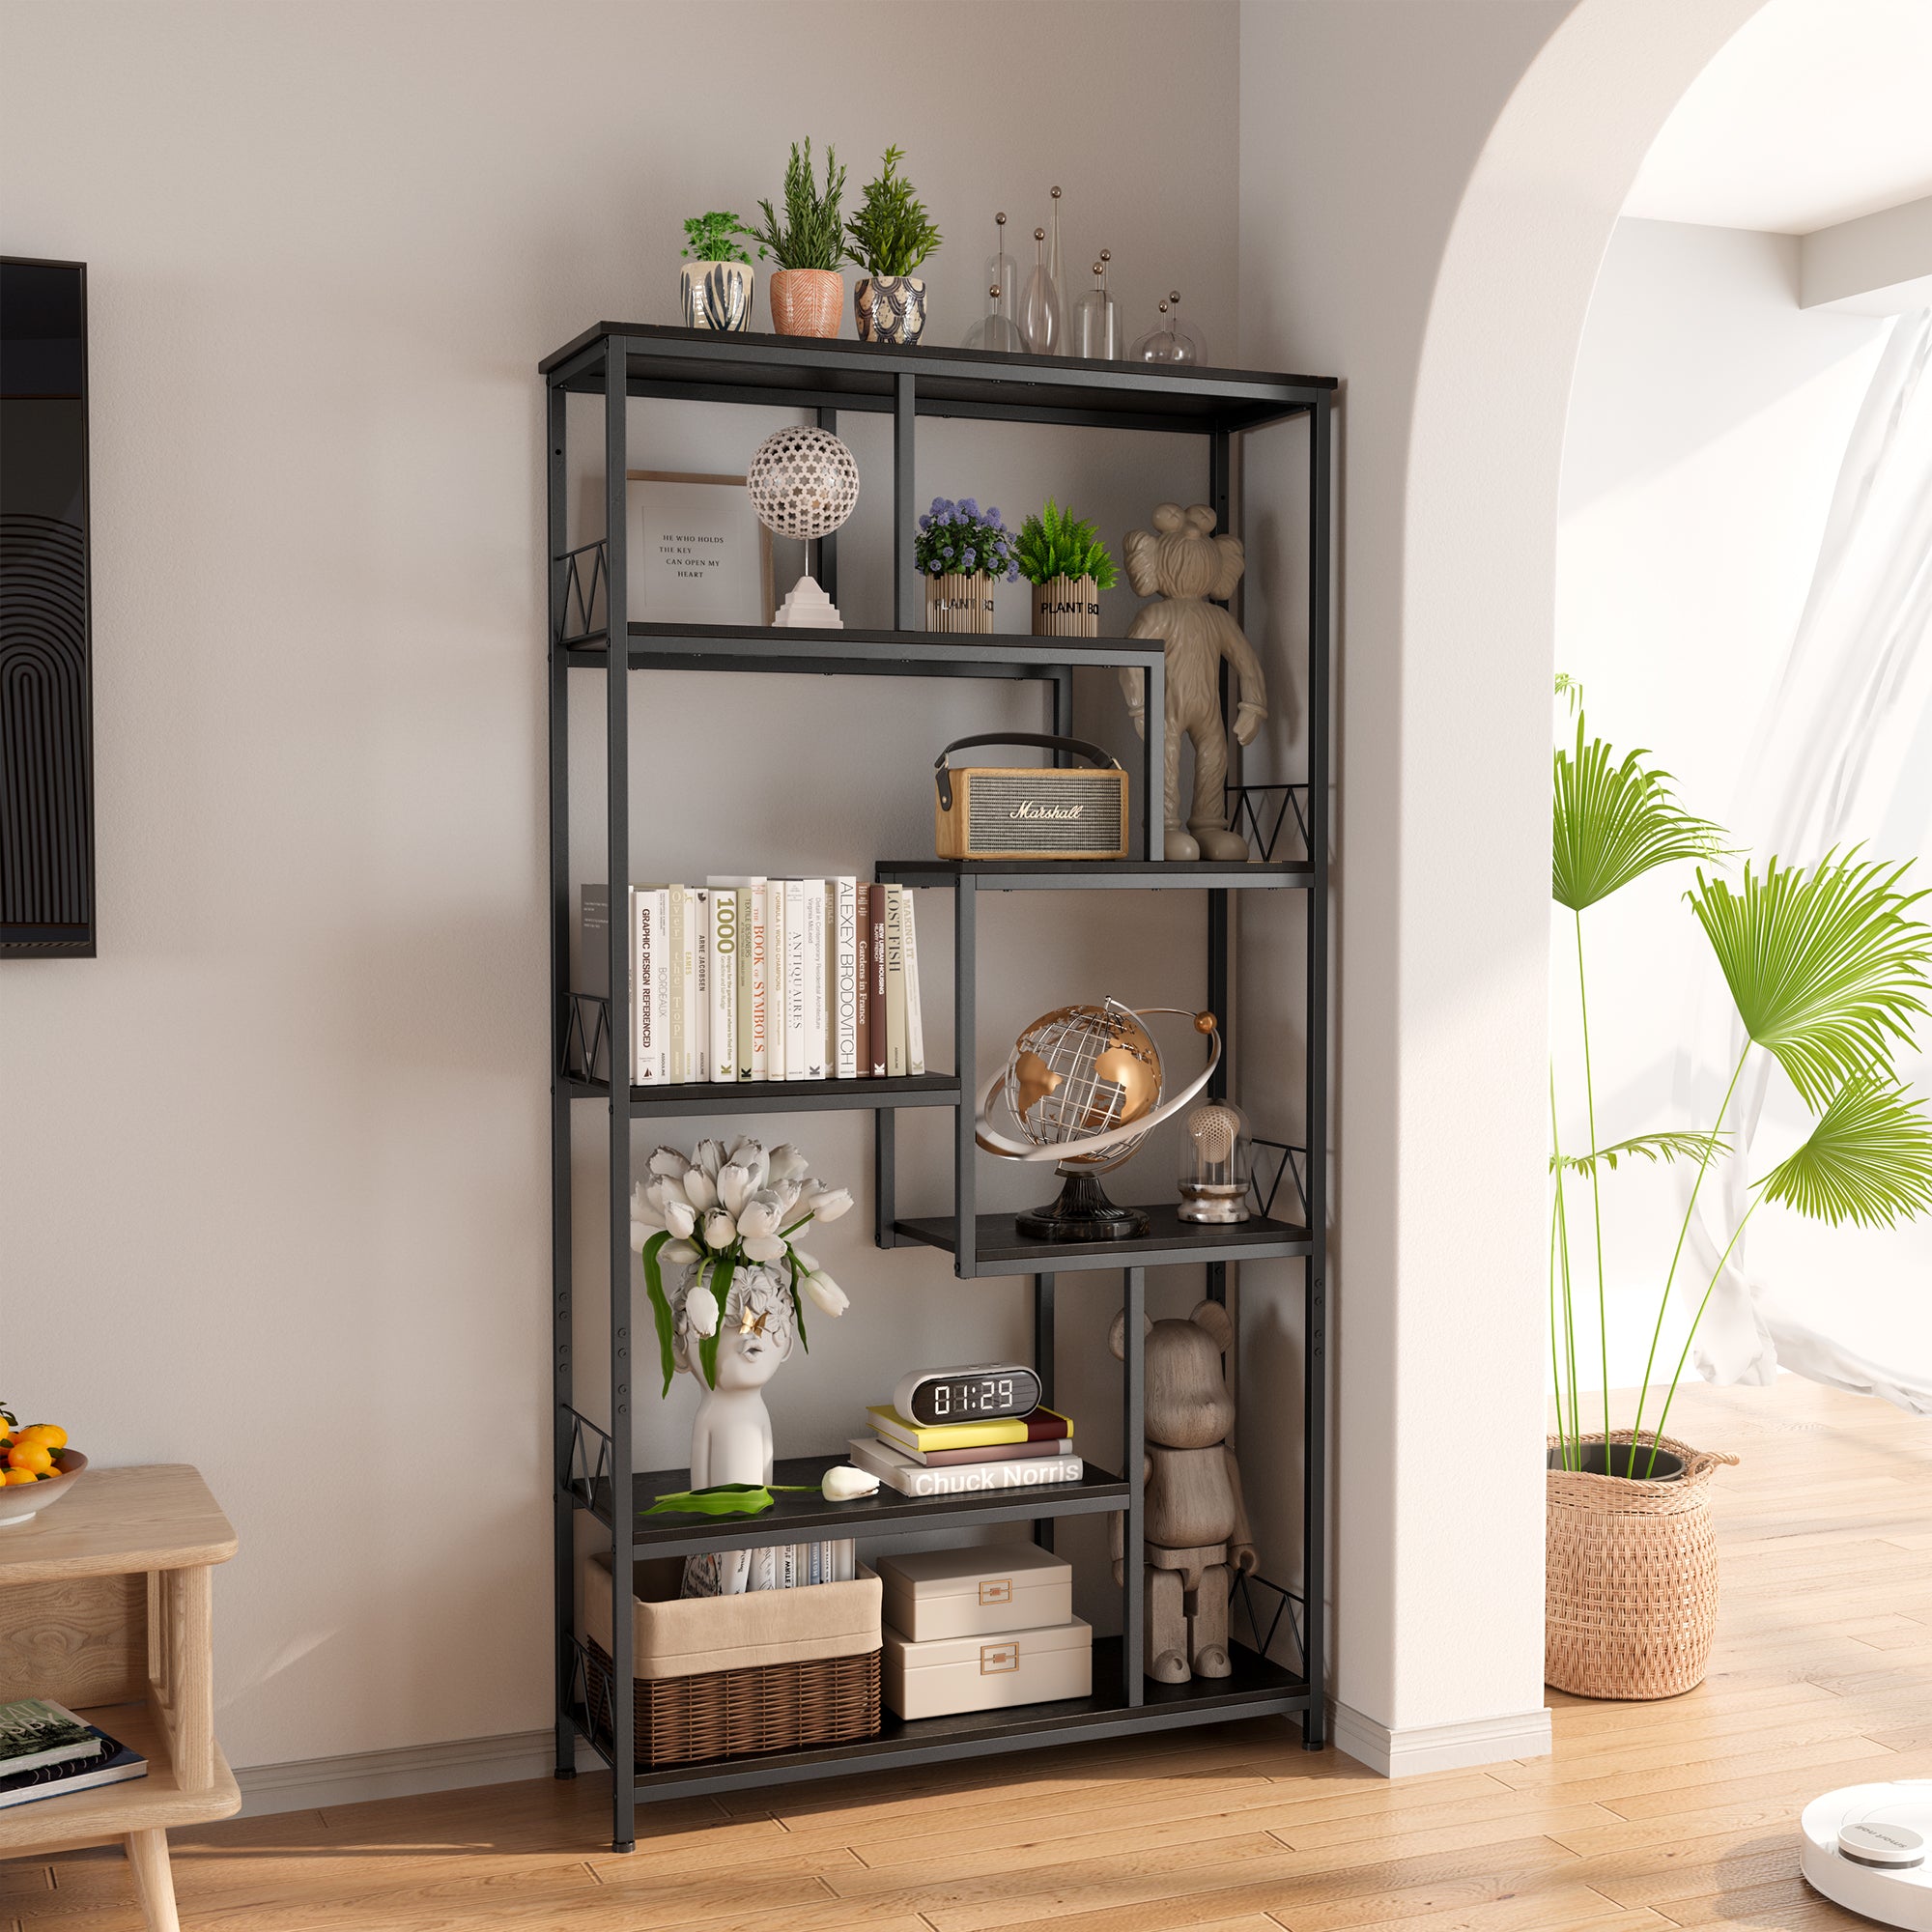 Gizoon FS13 71” Industrial Metal Frame Staggered Bookshelves for Storage